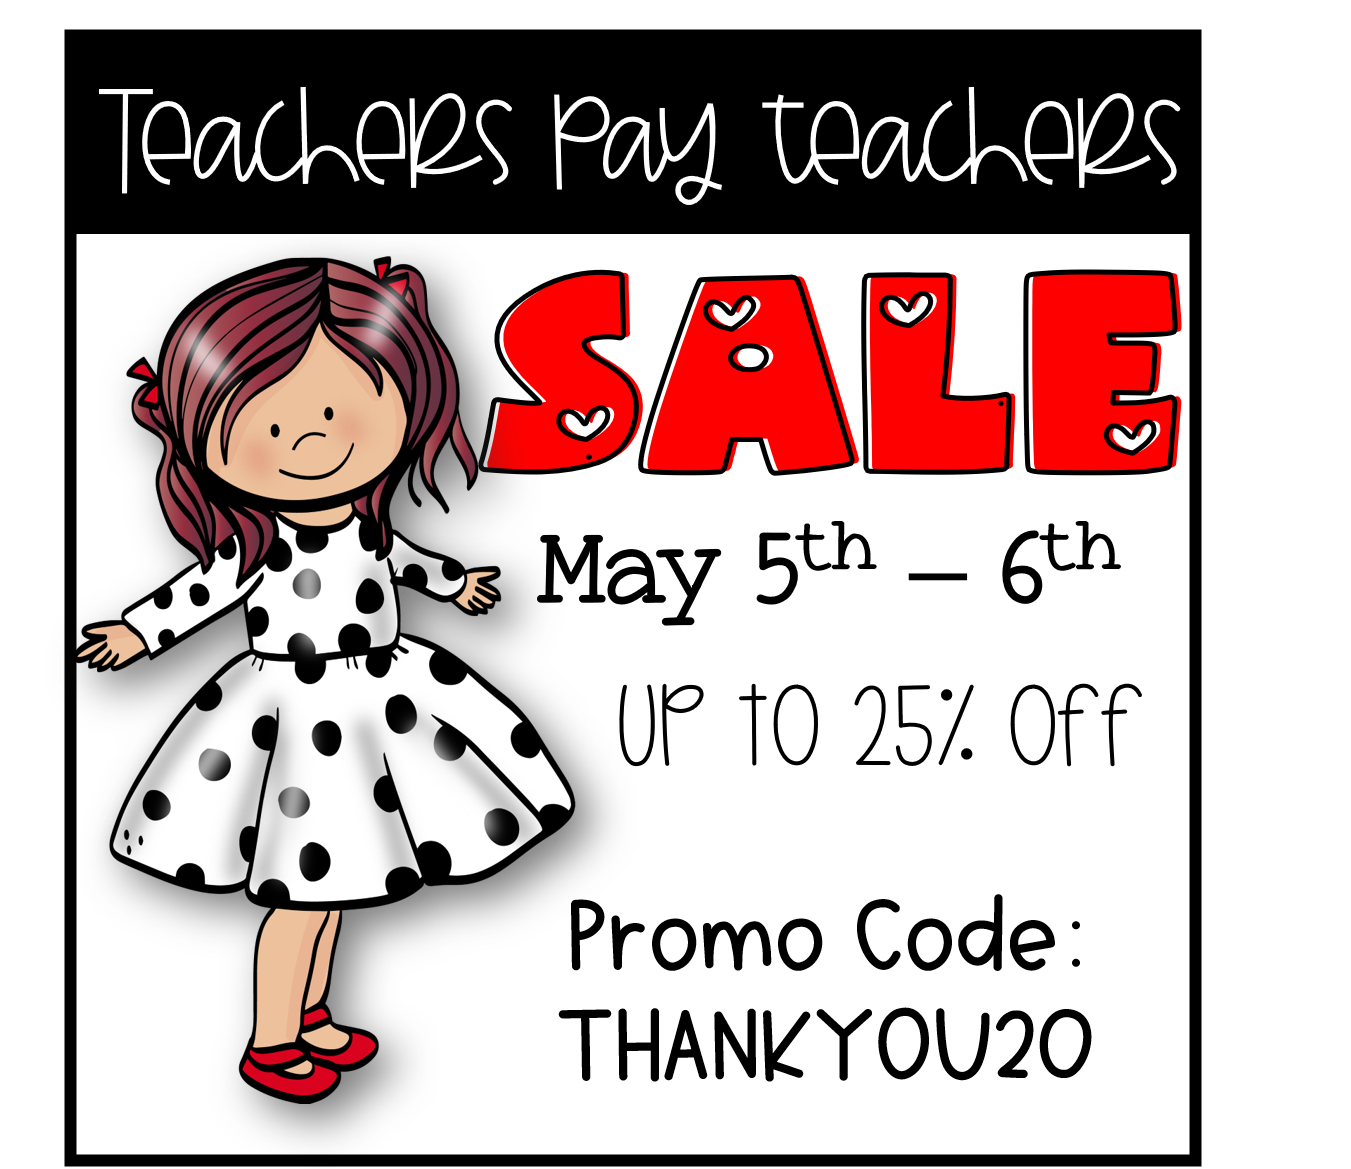 Simply Delightful in 2nd grade TpT sale and giveaway!